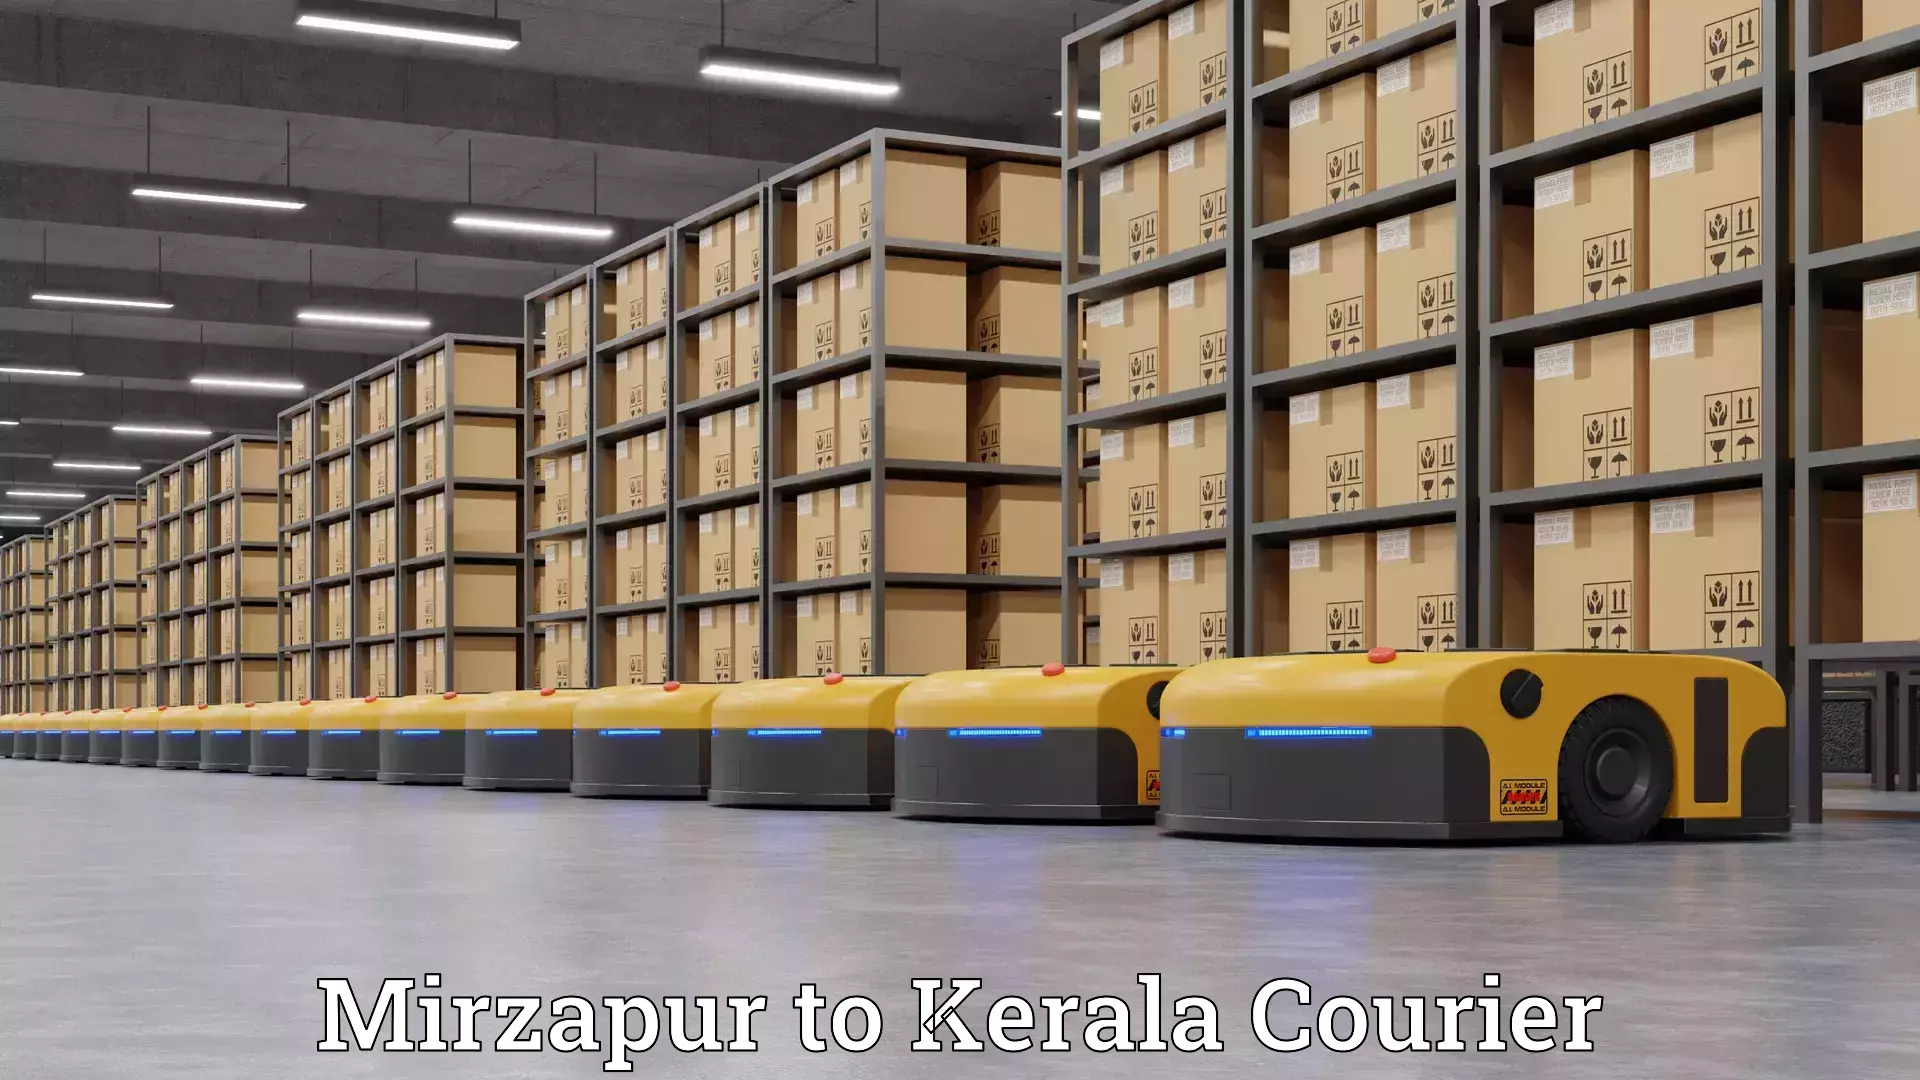 Moving and storage services Mirzapur to Kerala